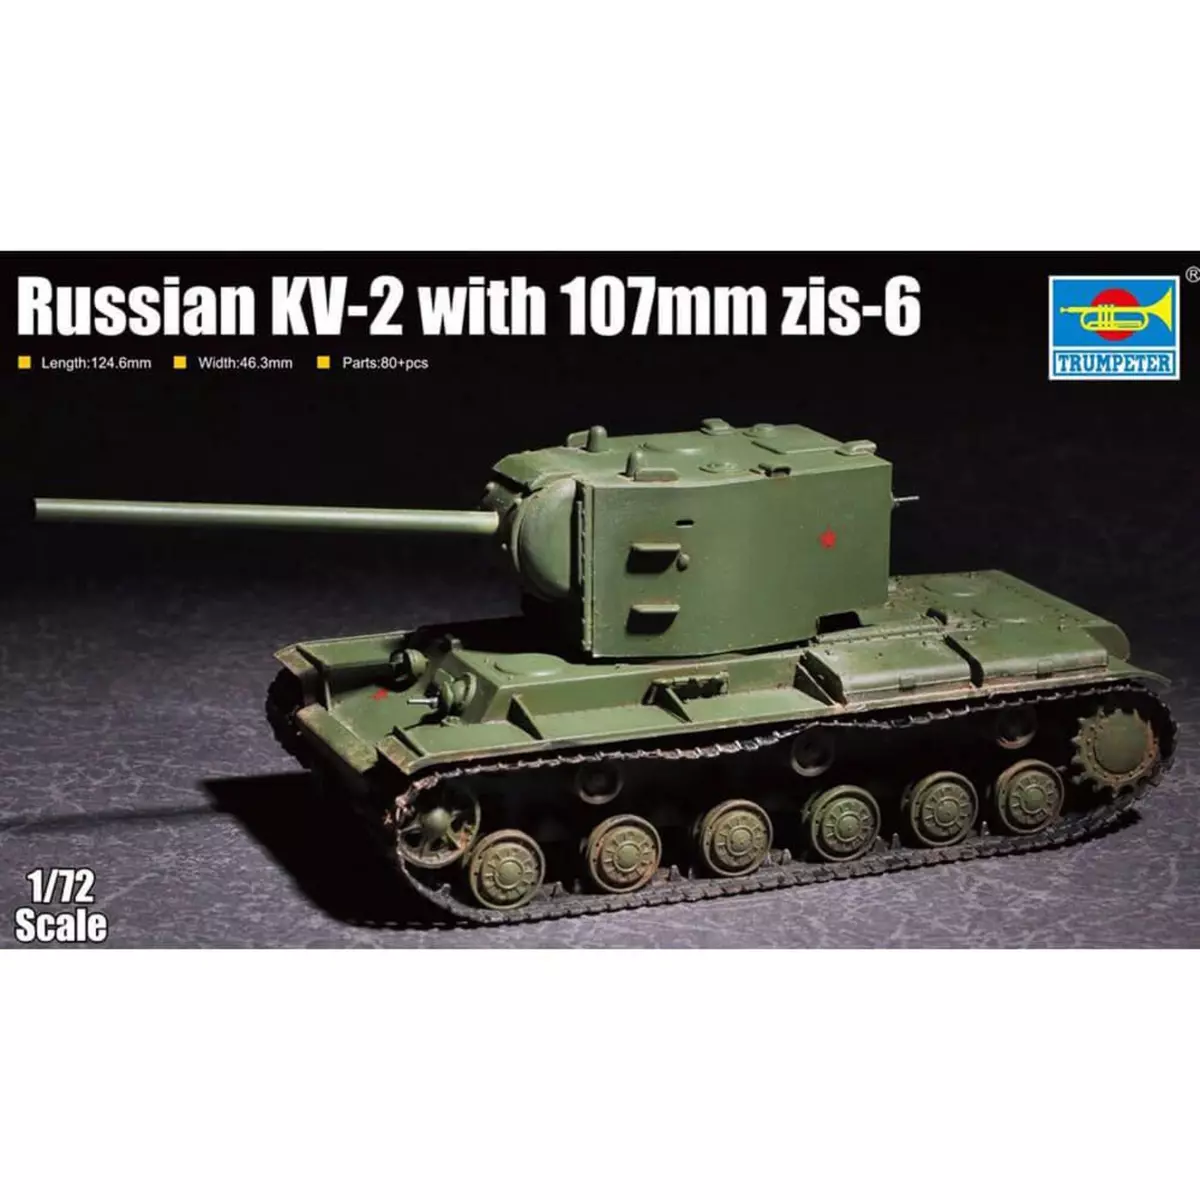 Trumpeter Maquette char : Char russe KV-2 with 107mm zis-6